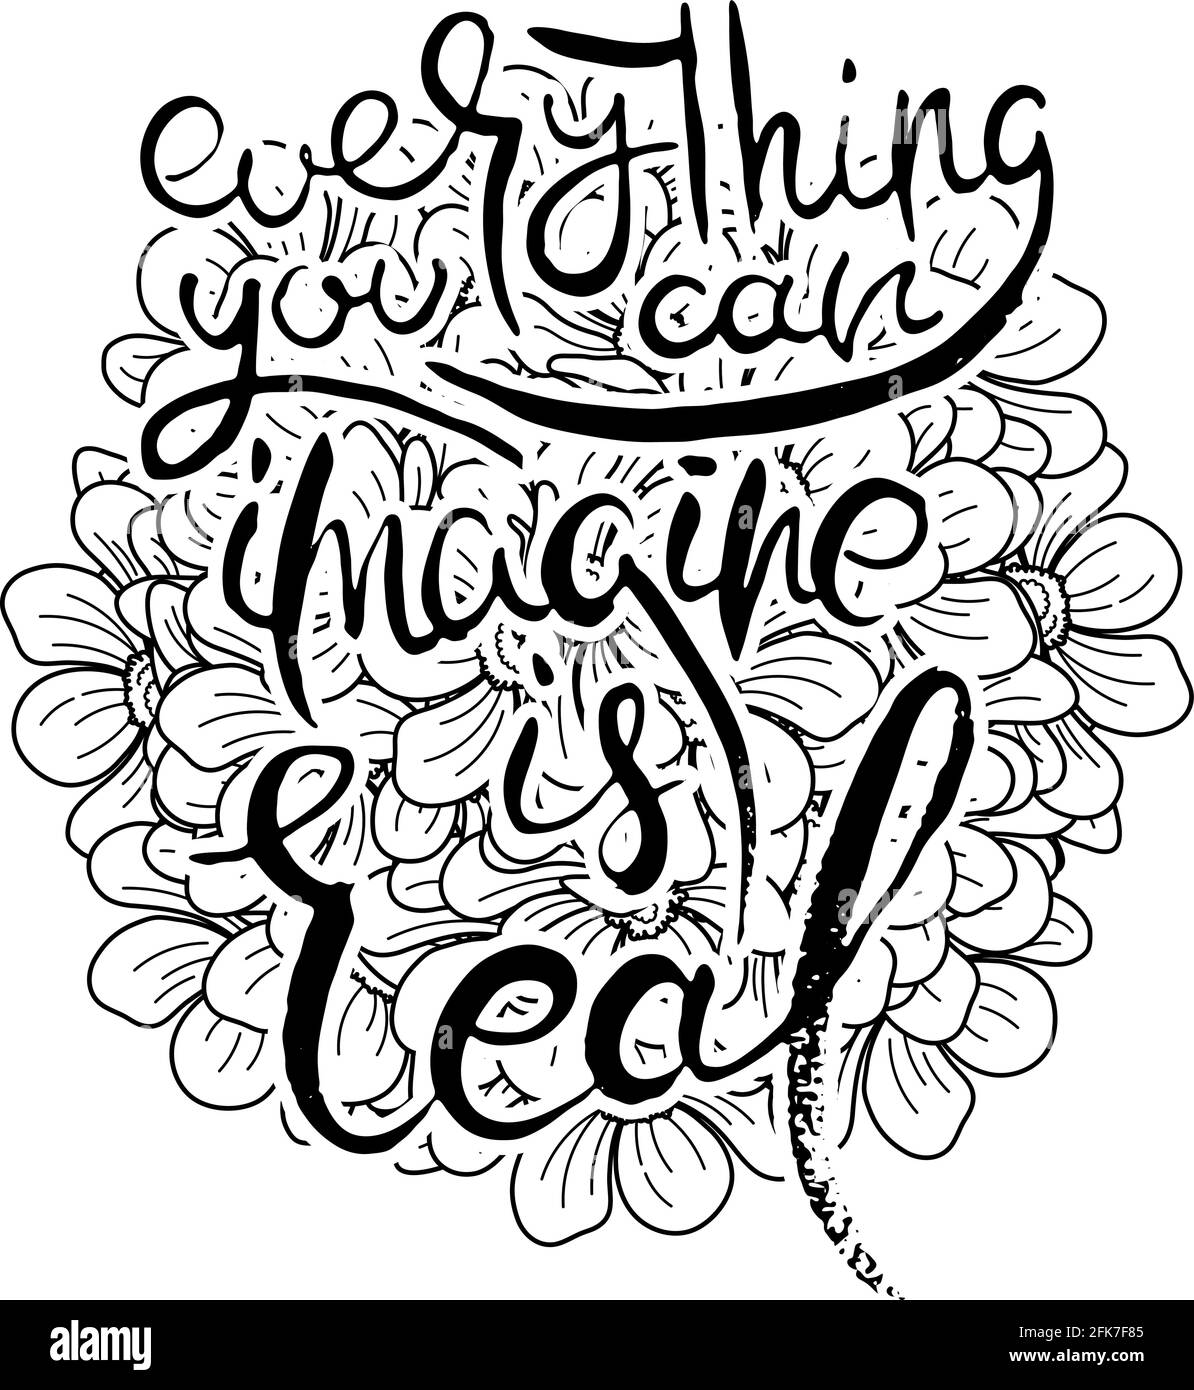 Everything You Can Imagine Is Real print by THE USUAL DESIGNERS